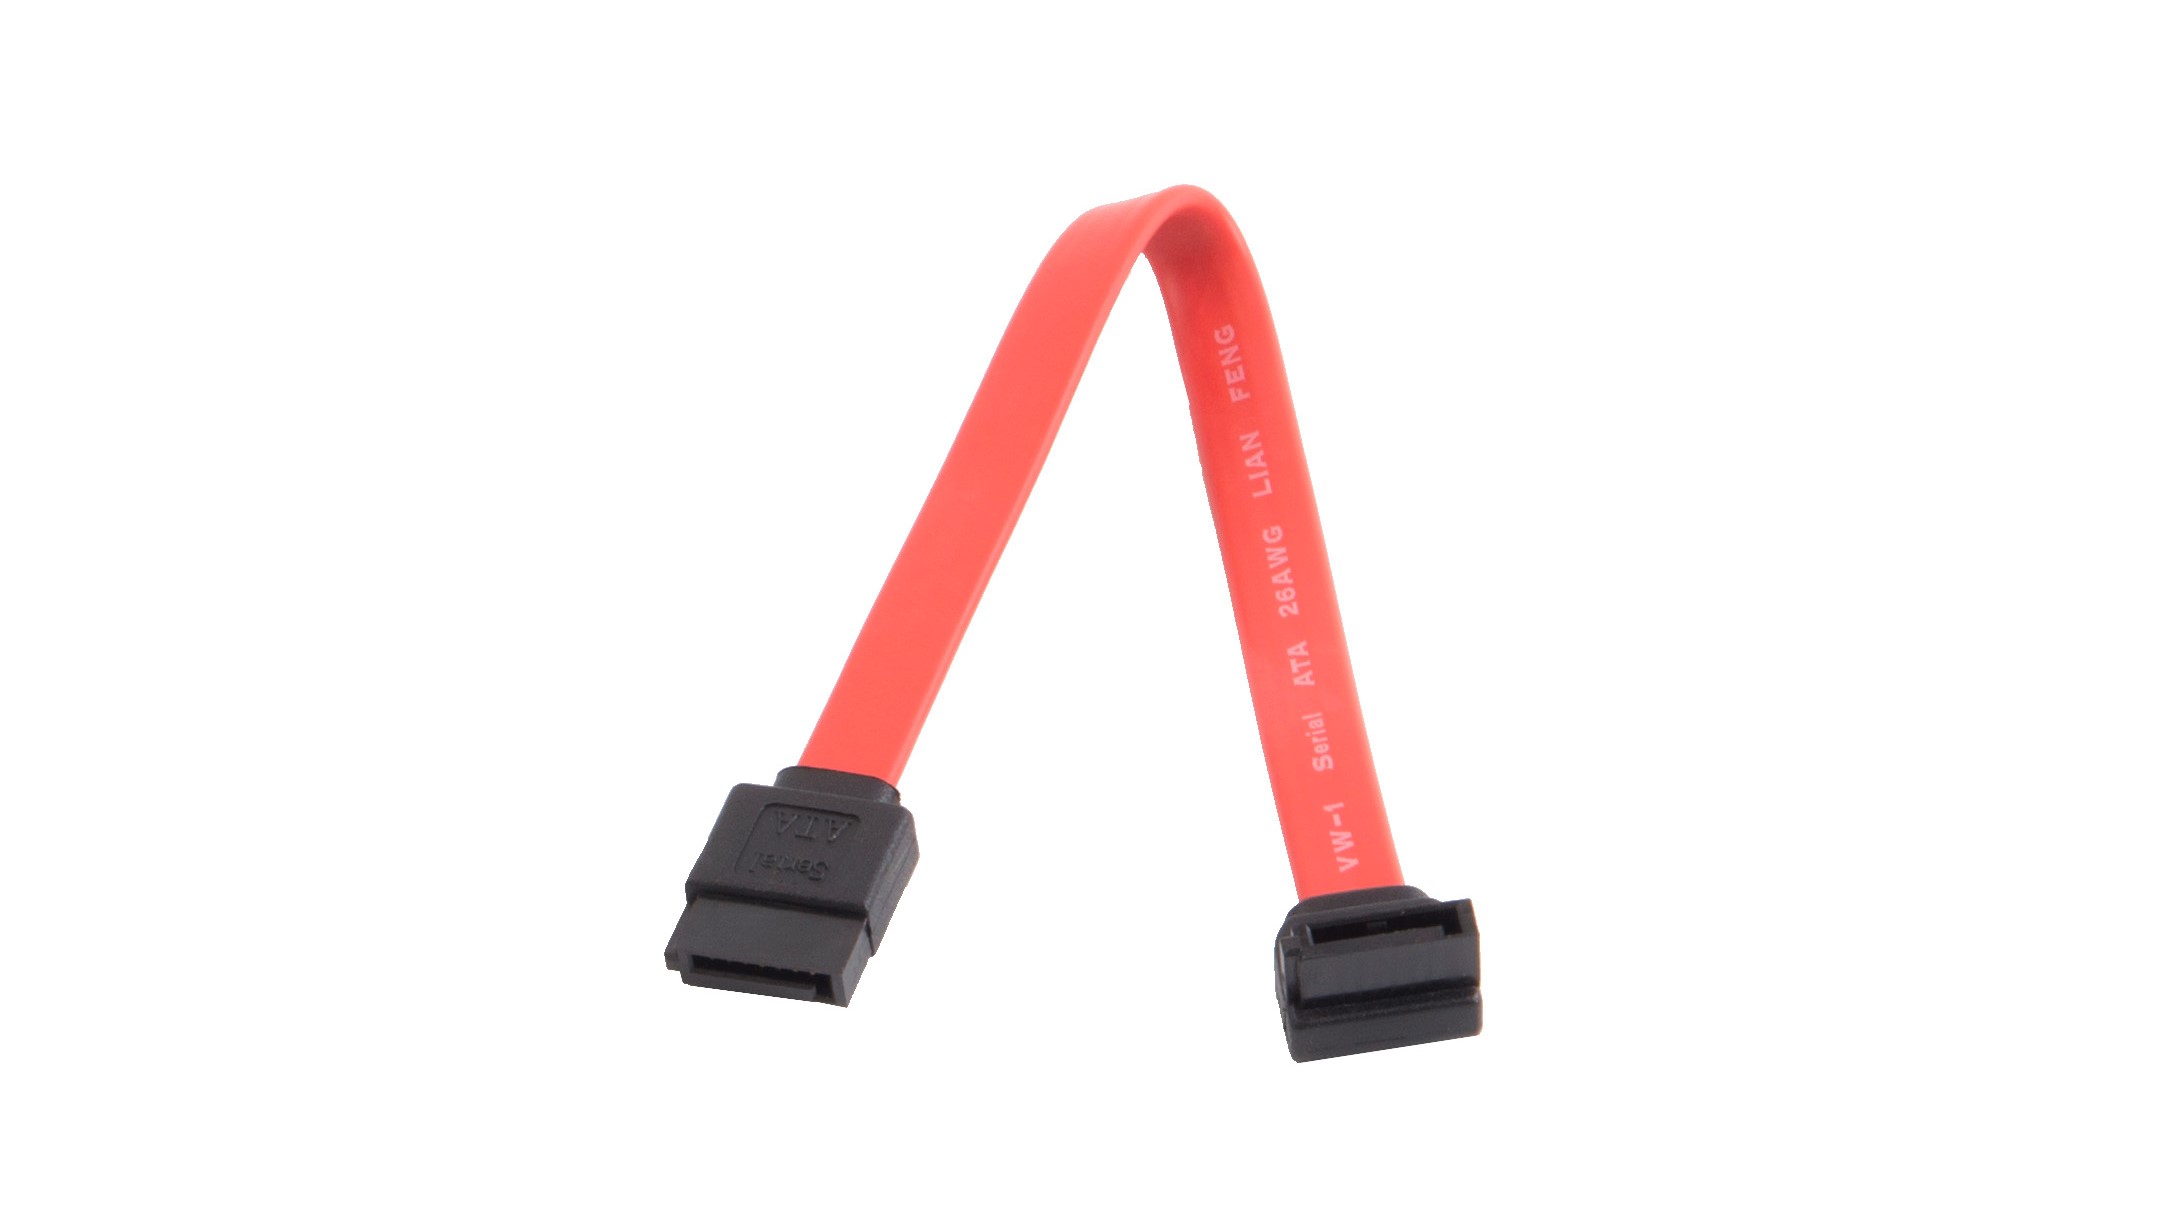 SATA CABLE 180-90  |Products|Accessories|Cable & Cord